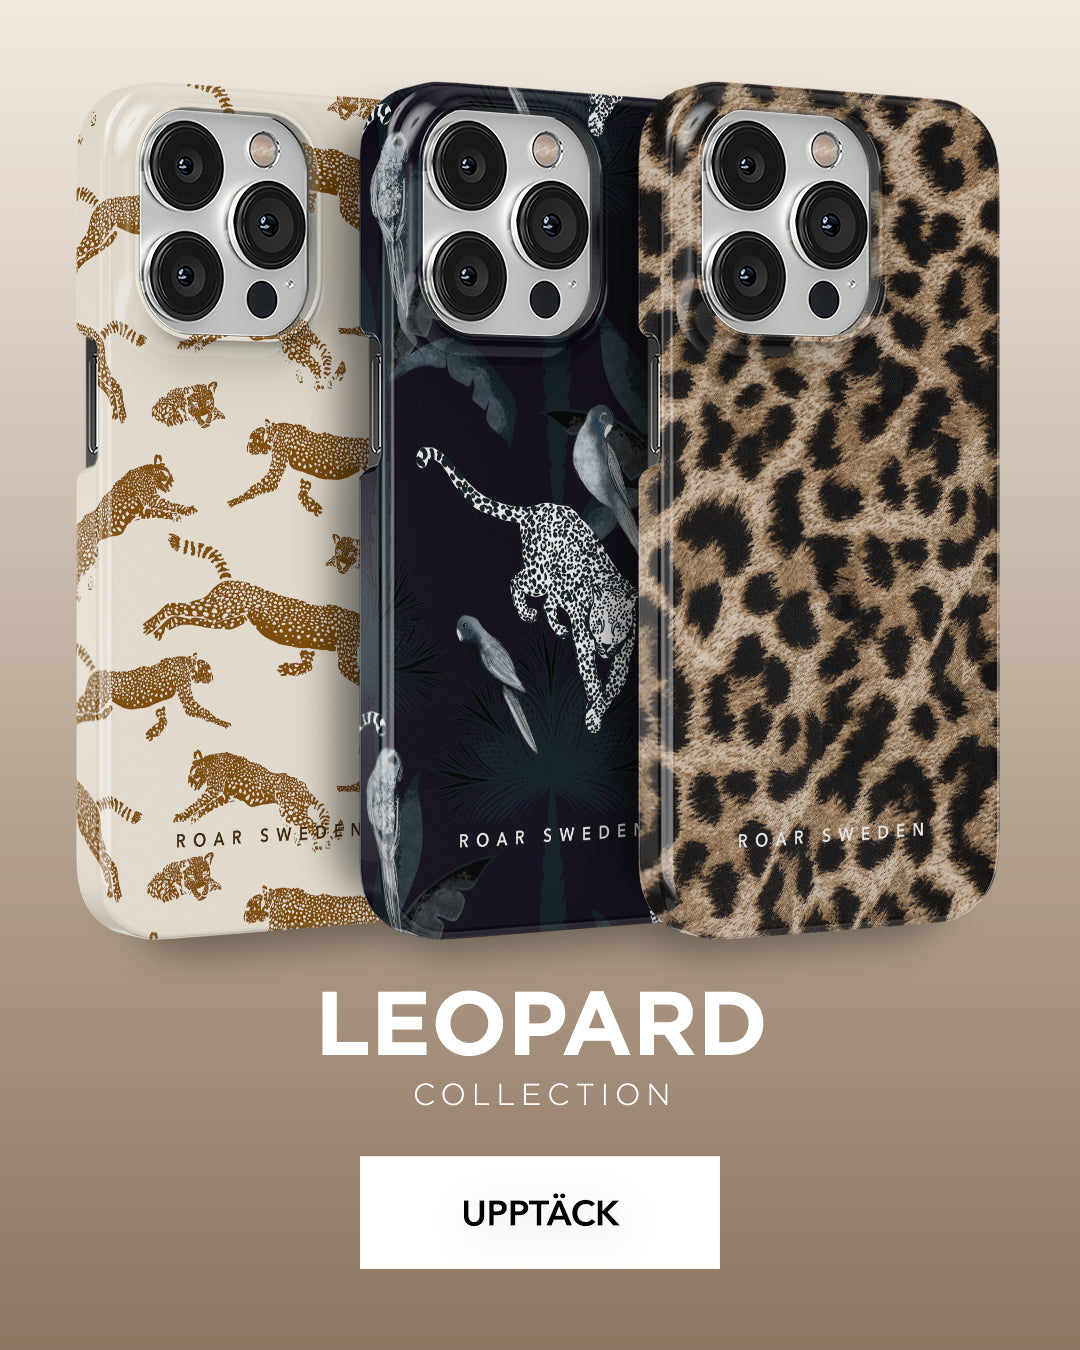 A display of leopard-themed smartphone cases from the uppercase leopard collection.